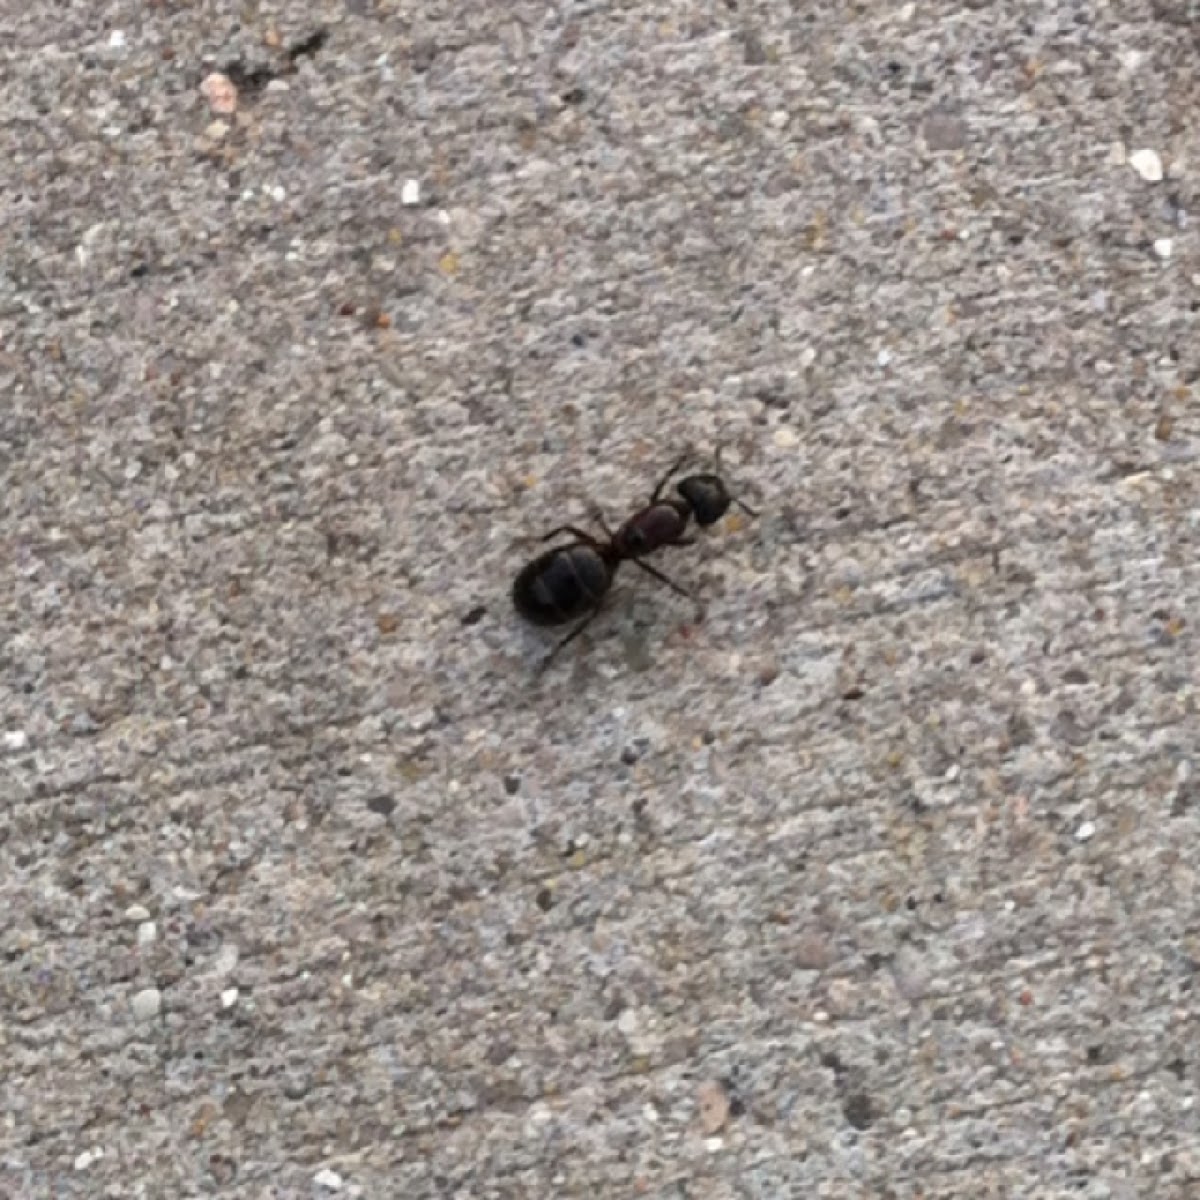 Carpenter ant (possibly dealate queen)